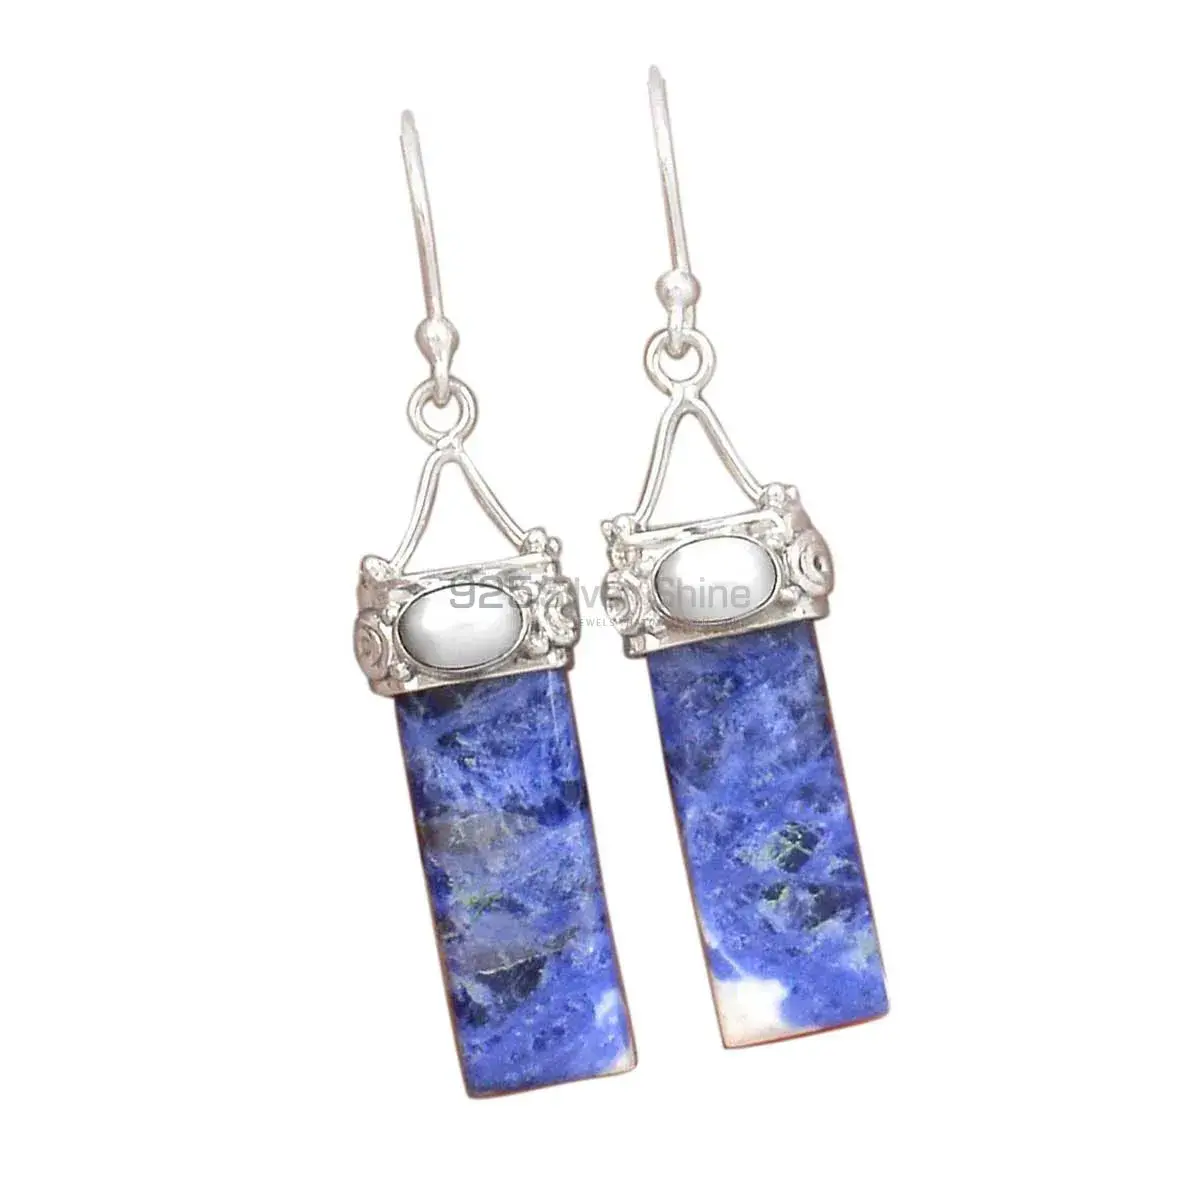 Affordable 925 Sterling Silver Handmade Earrings Manufacturer In Multi Gemstone Jewelry 925SE3105